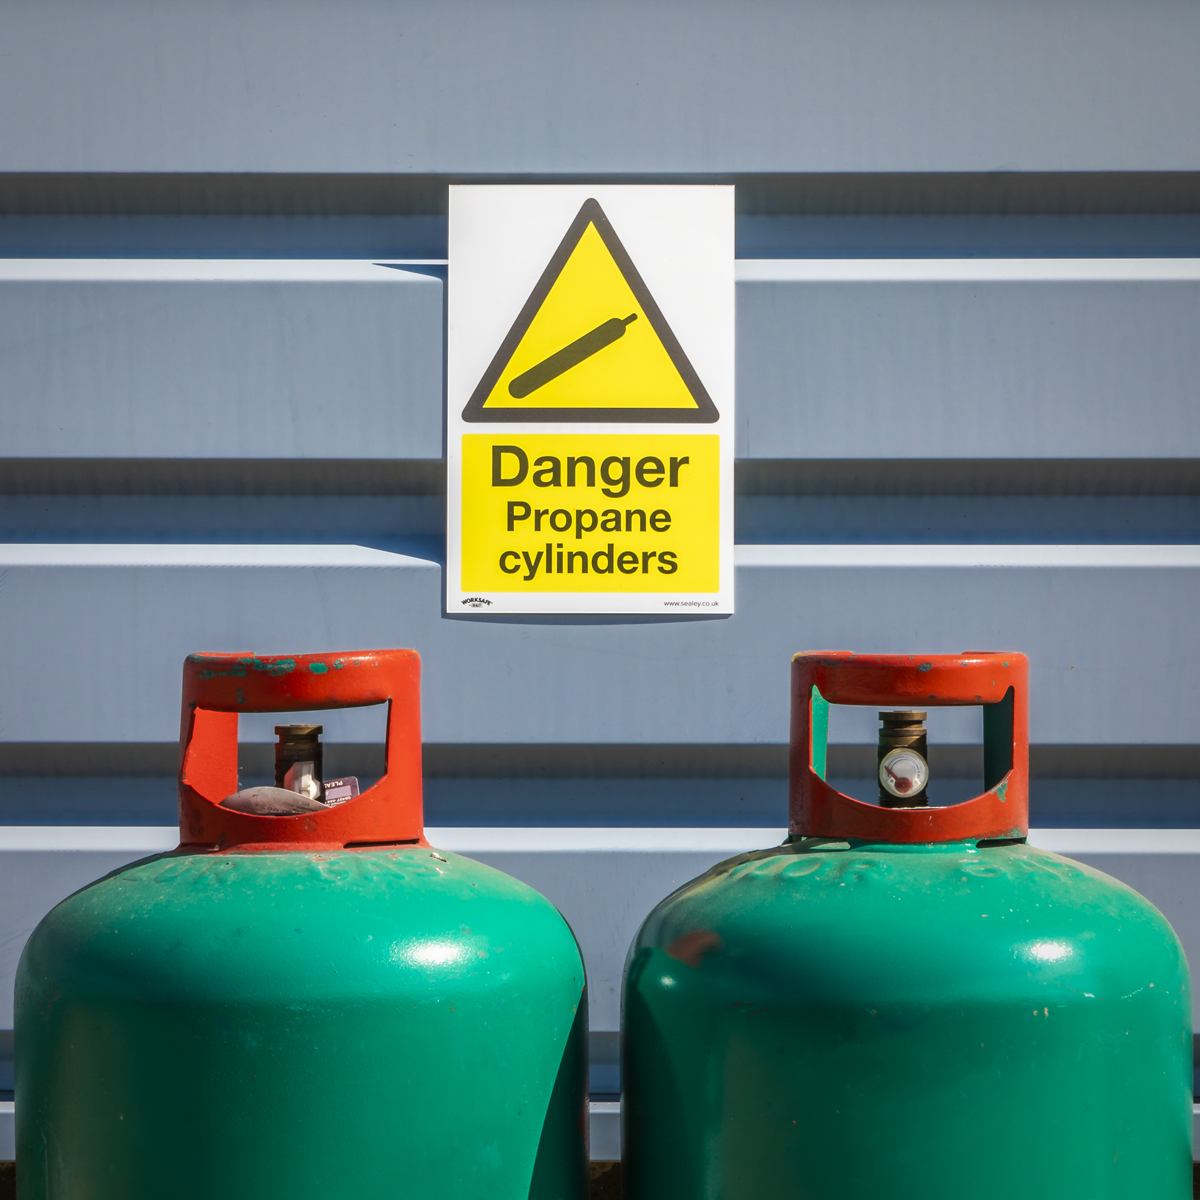 Warning Safety Sign - Danger Propane Cylinders - Rigid Plastic - Pack of 10